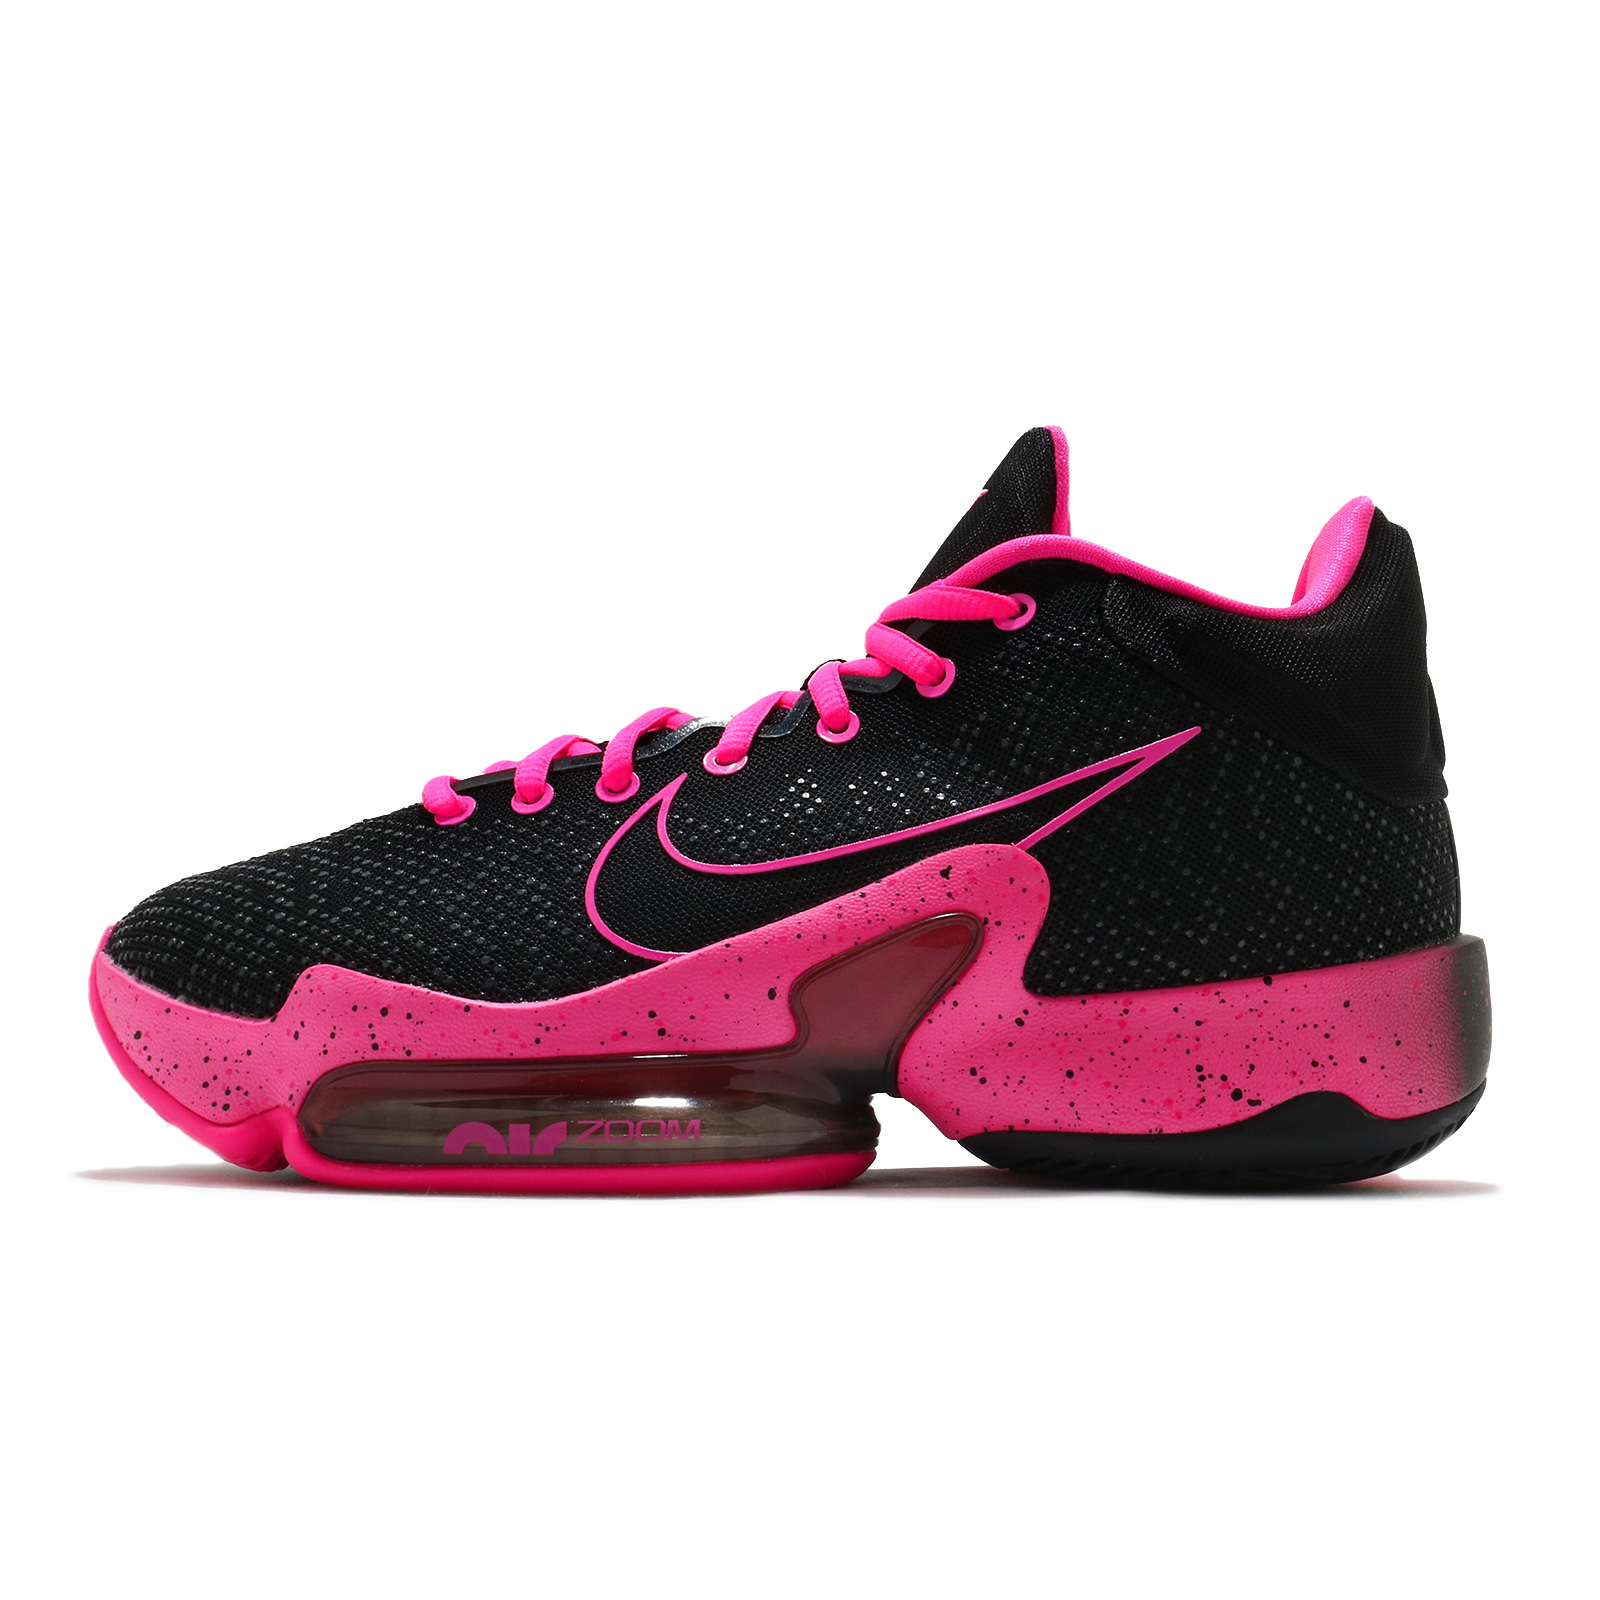 nike zoom breast cancer shoes